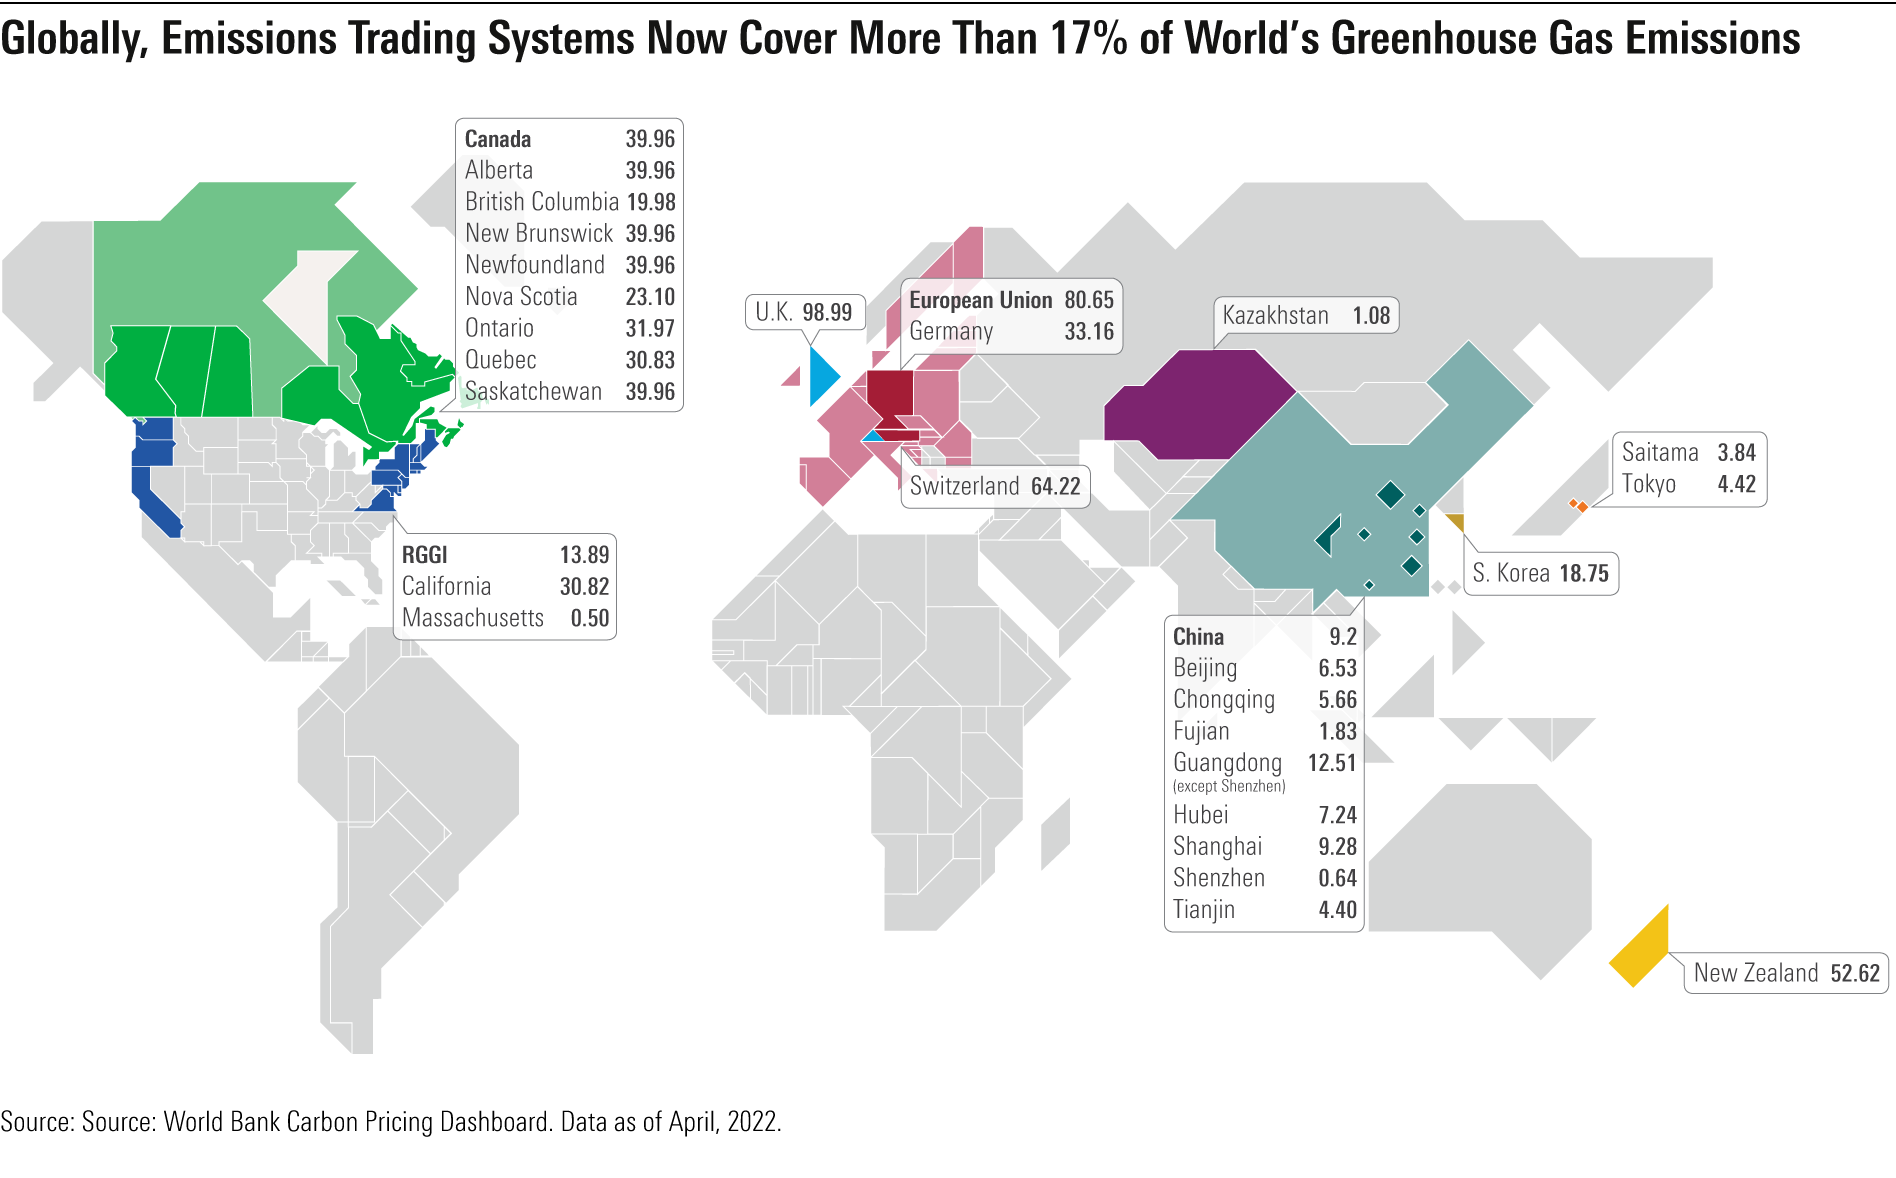 A map showing the percentage of greenhouse gas emissions that are covered by emissions trading systems around the globe.